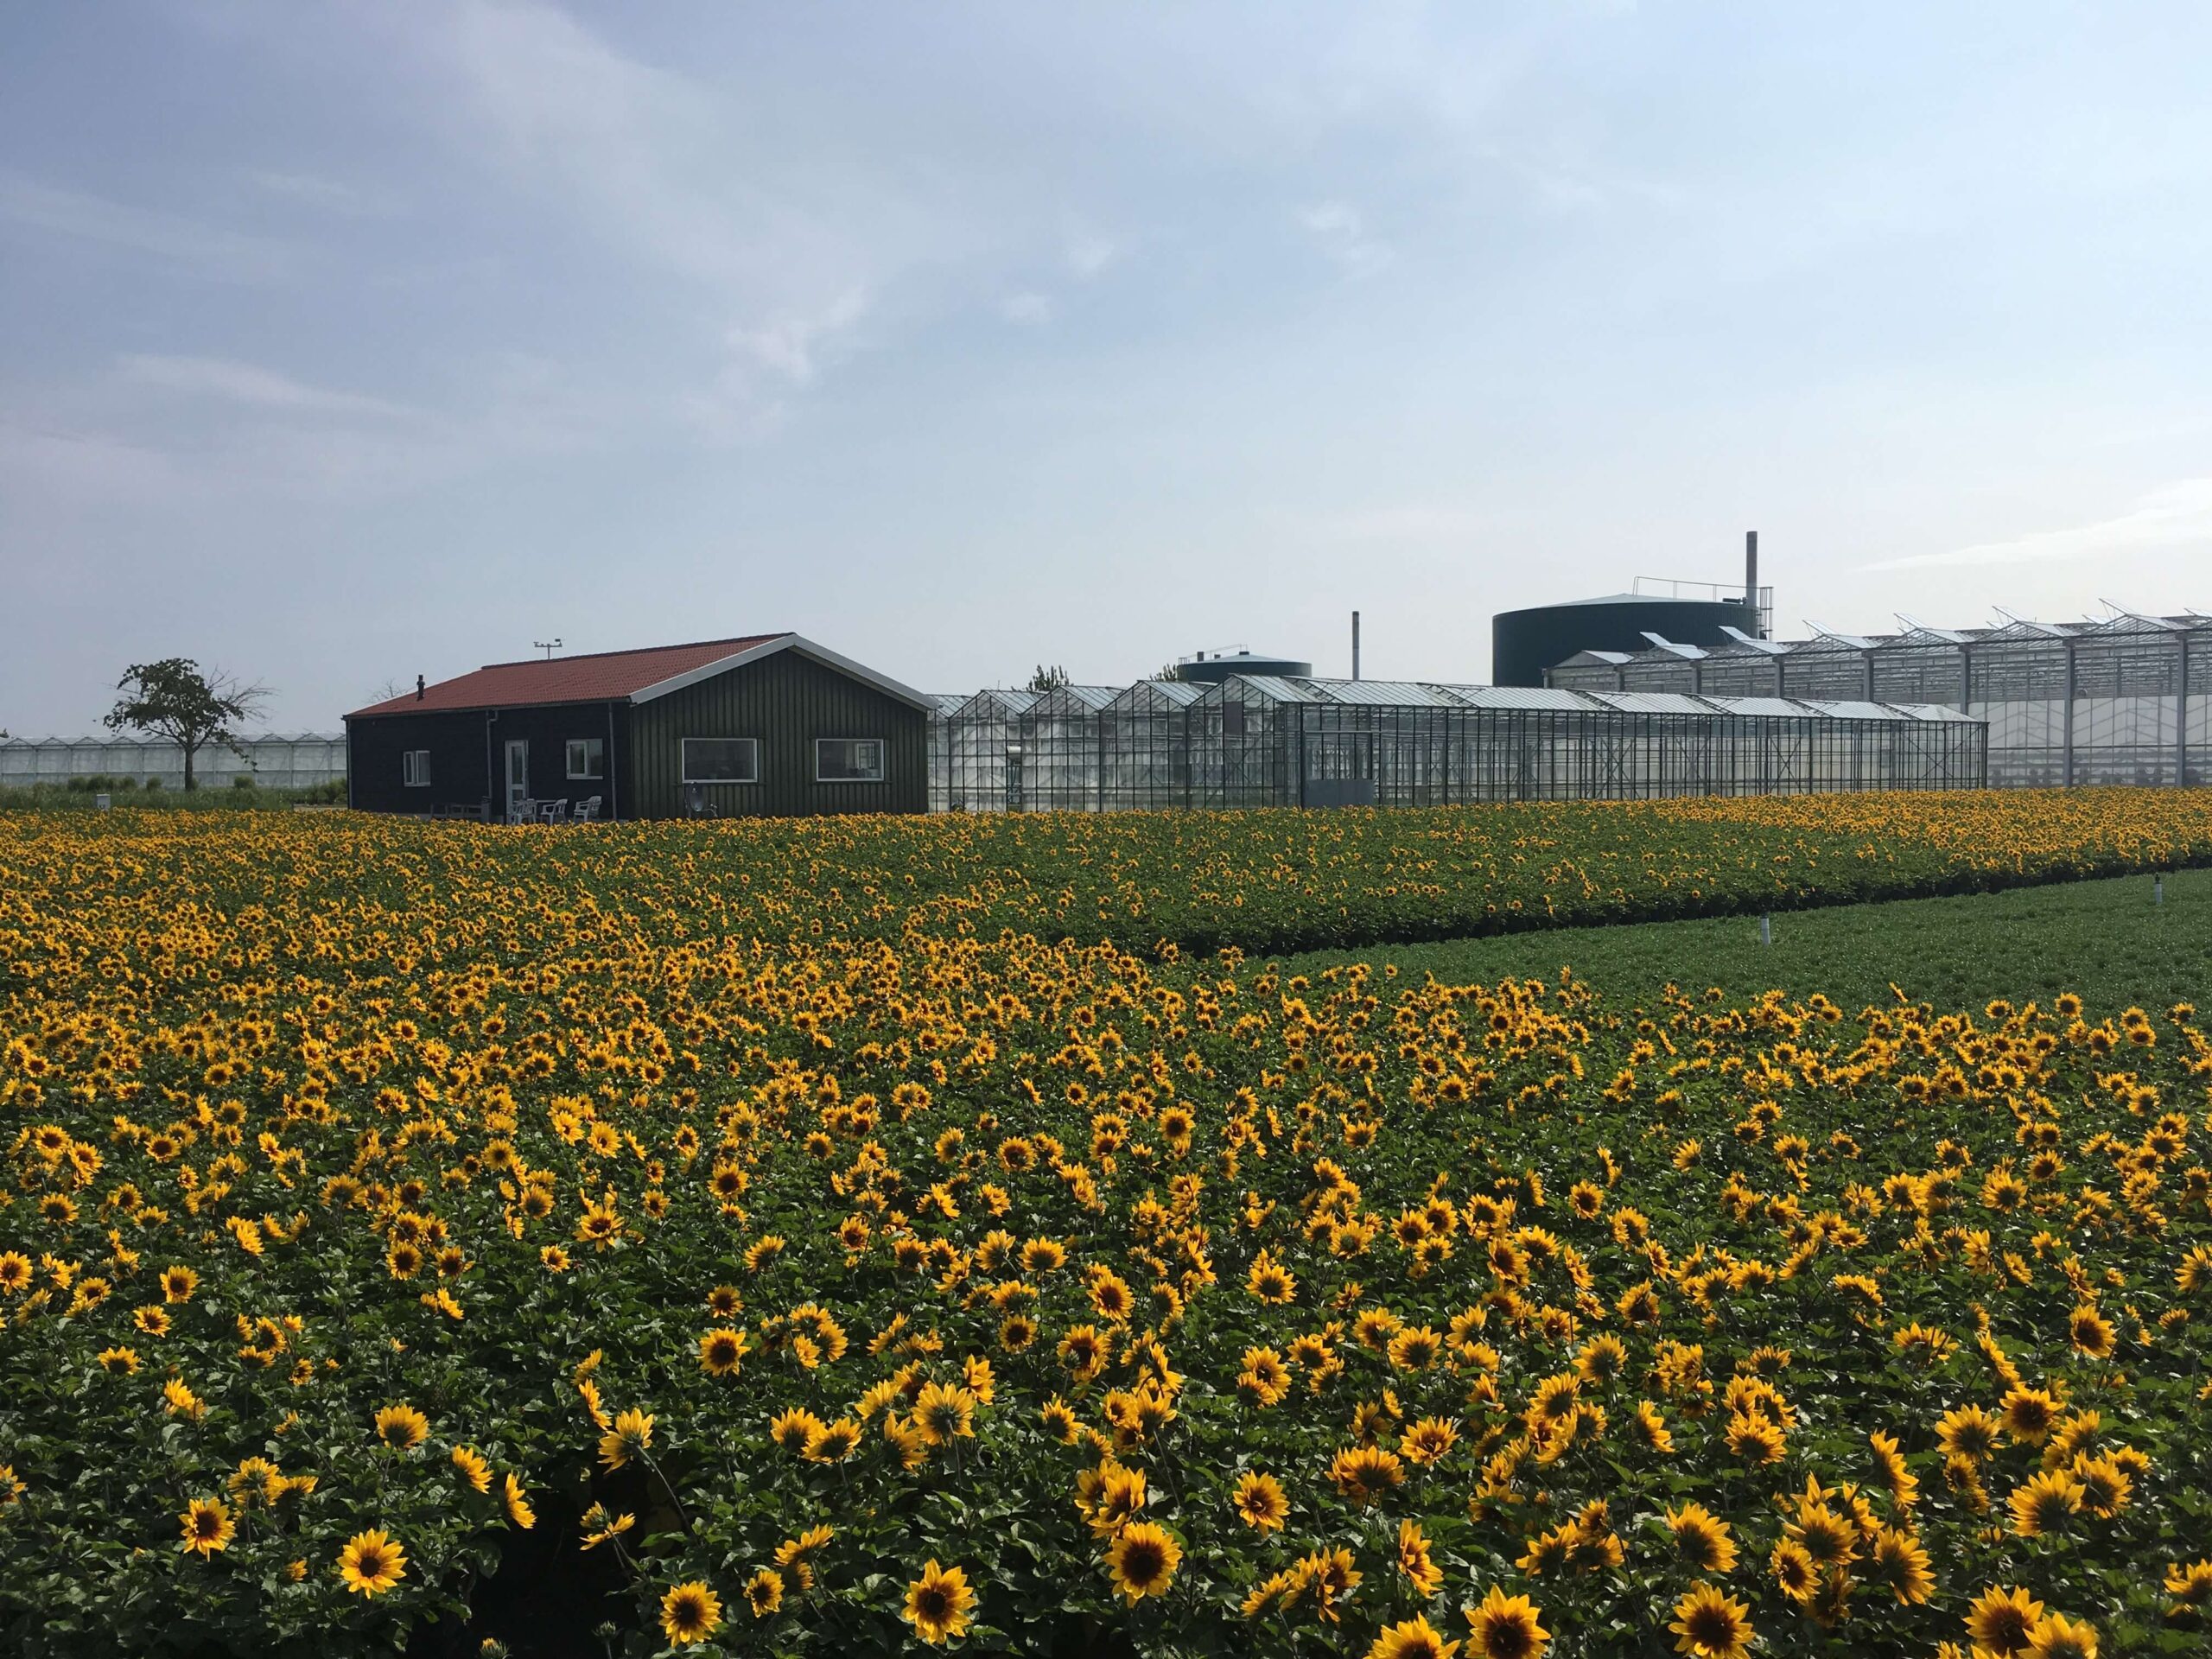 Dutch flower growers use sensors to prevent leaching into groundwater